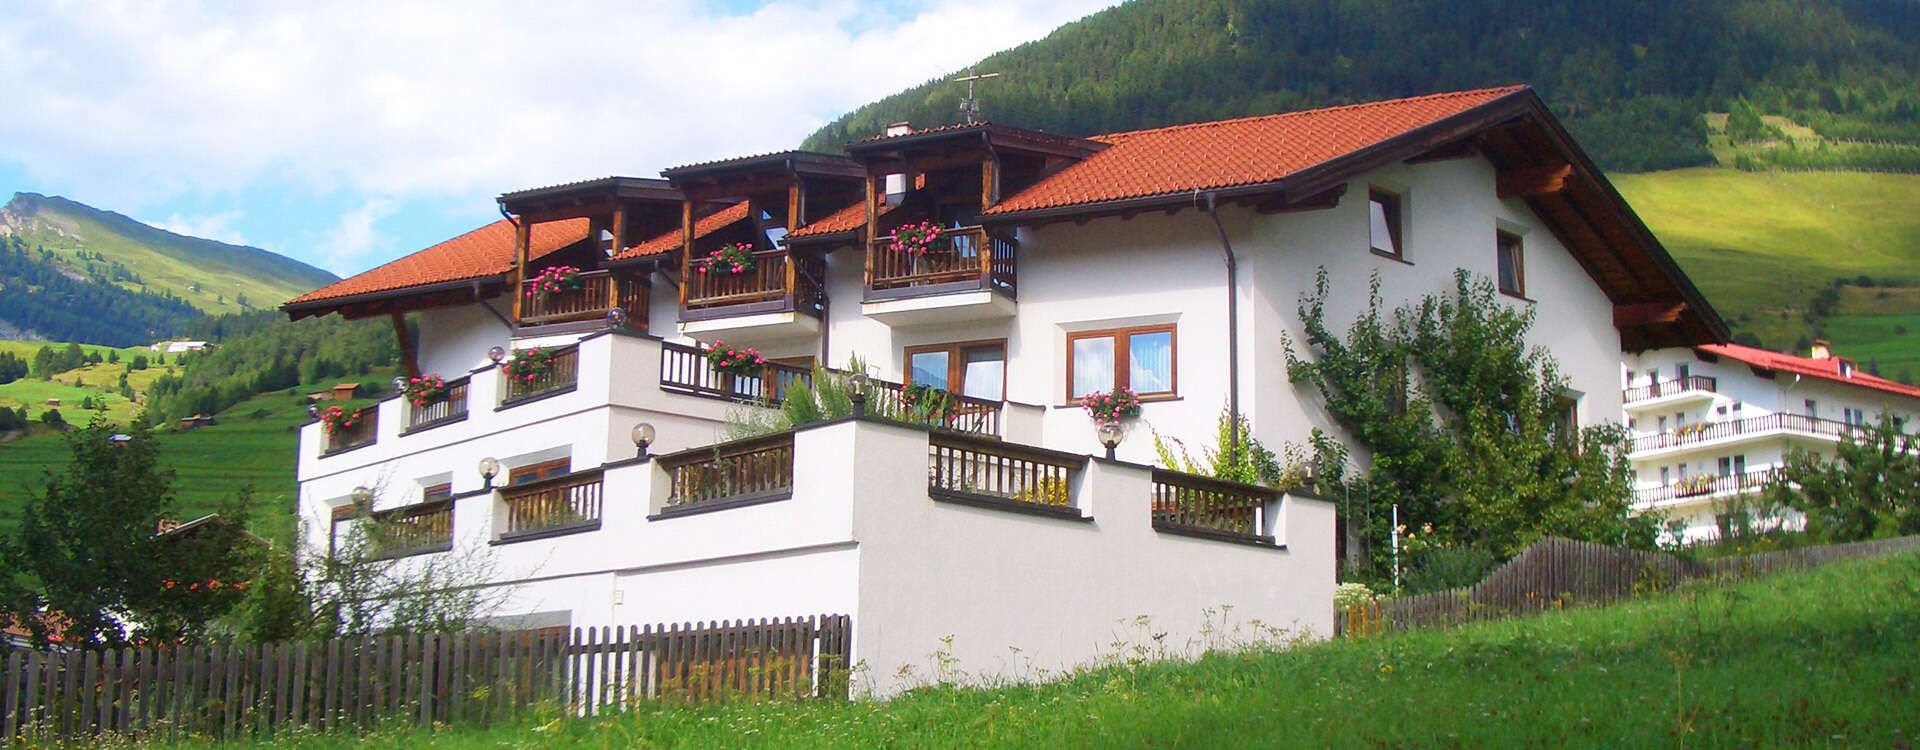 Holiday home Auer in Nauders in Tyrol